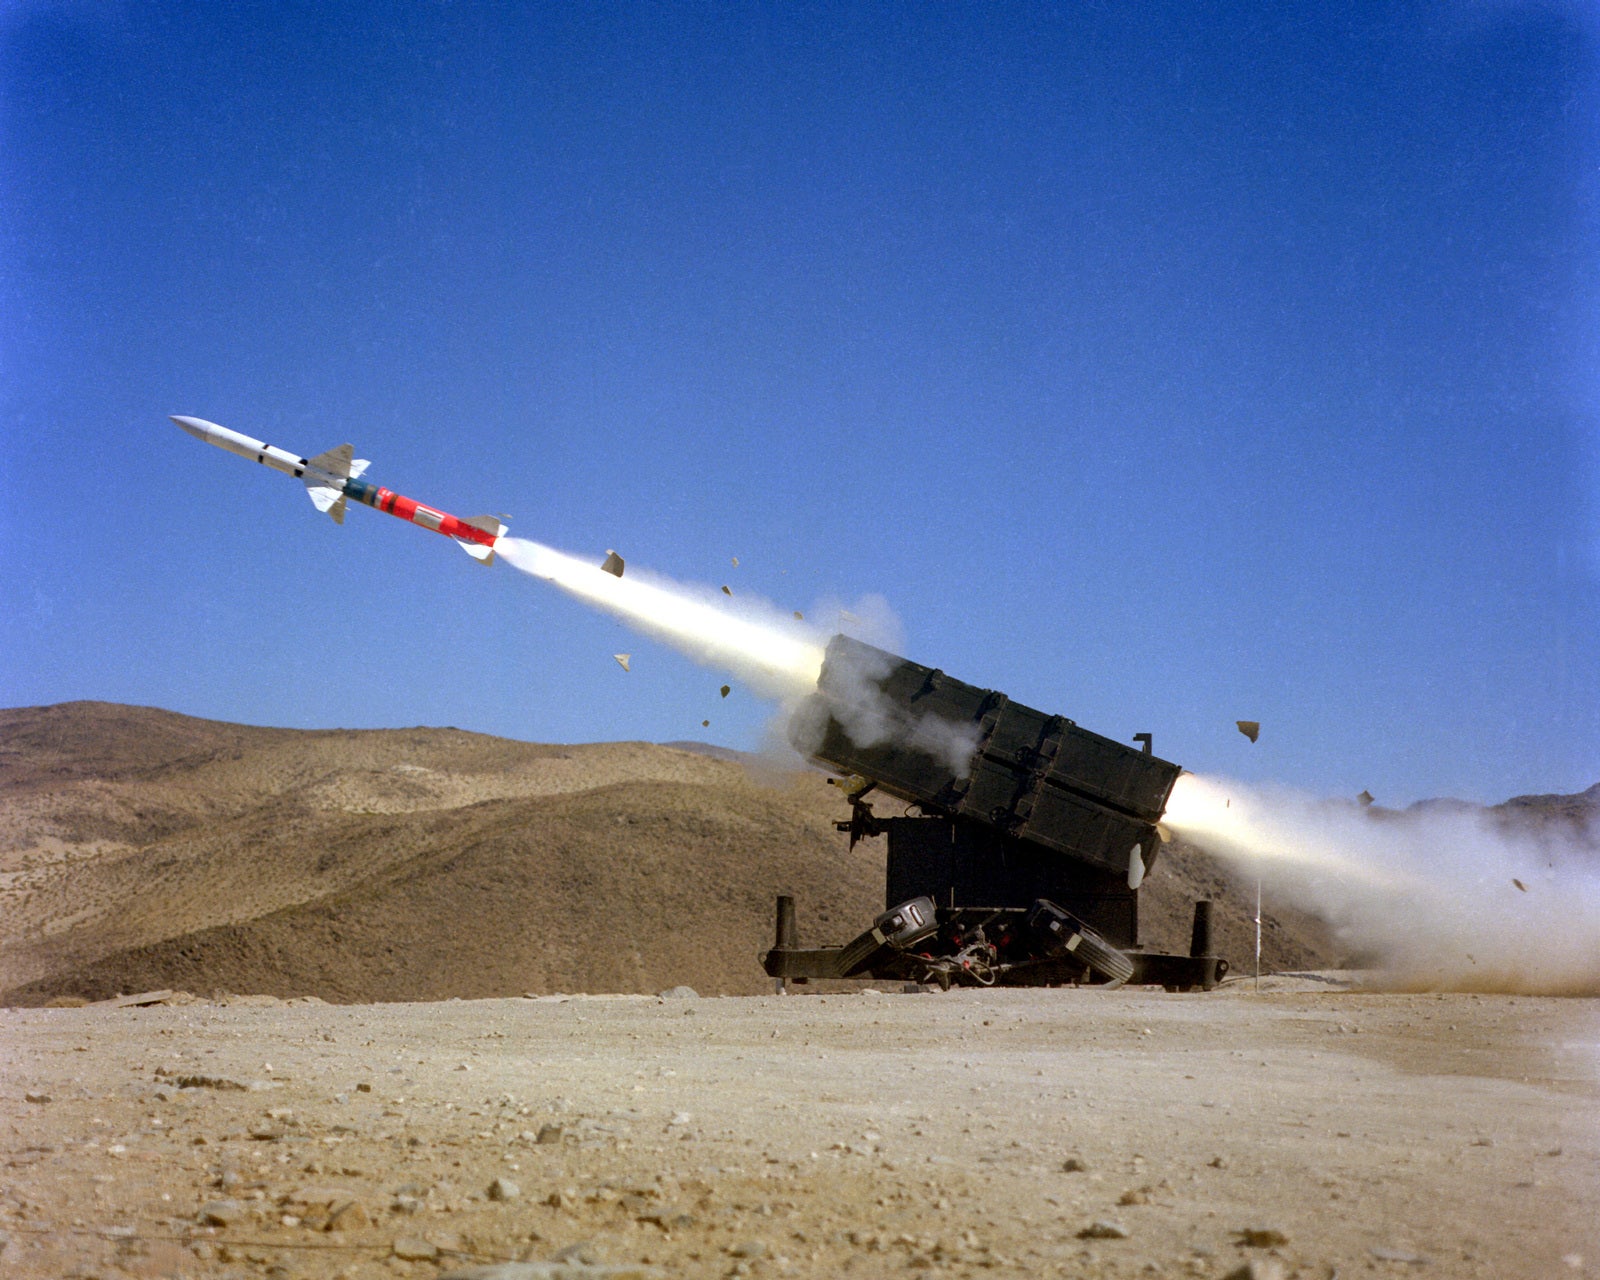 A left side view of an AIM-7F Sparrow III air-to-air missile being launched from a Skyguard missile launcher.